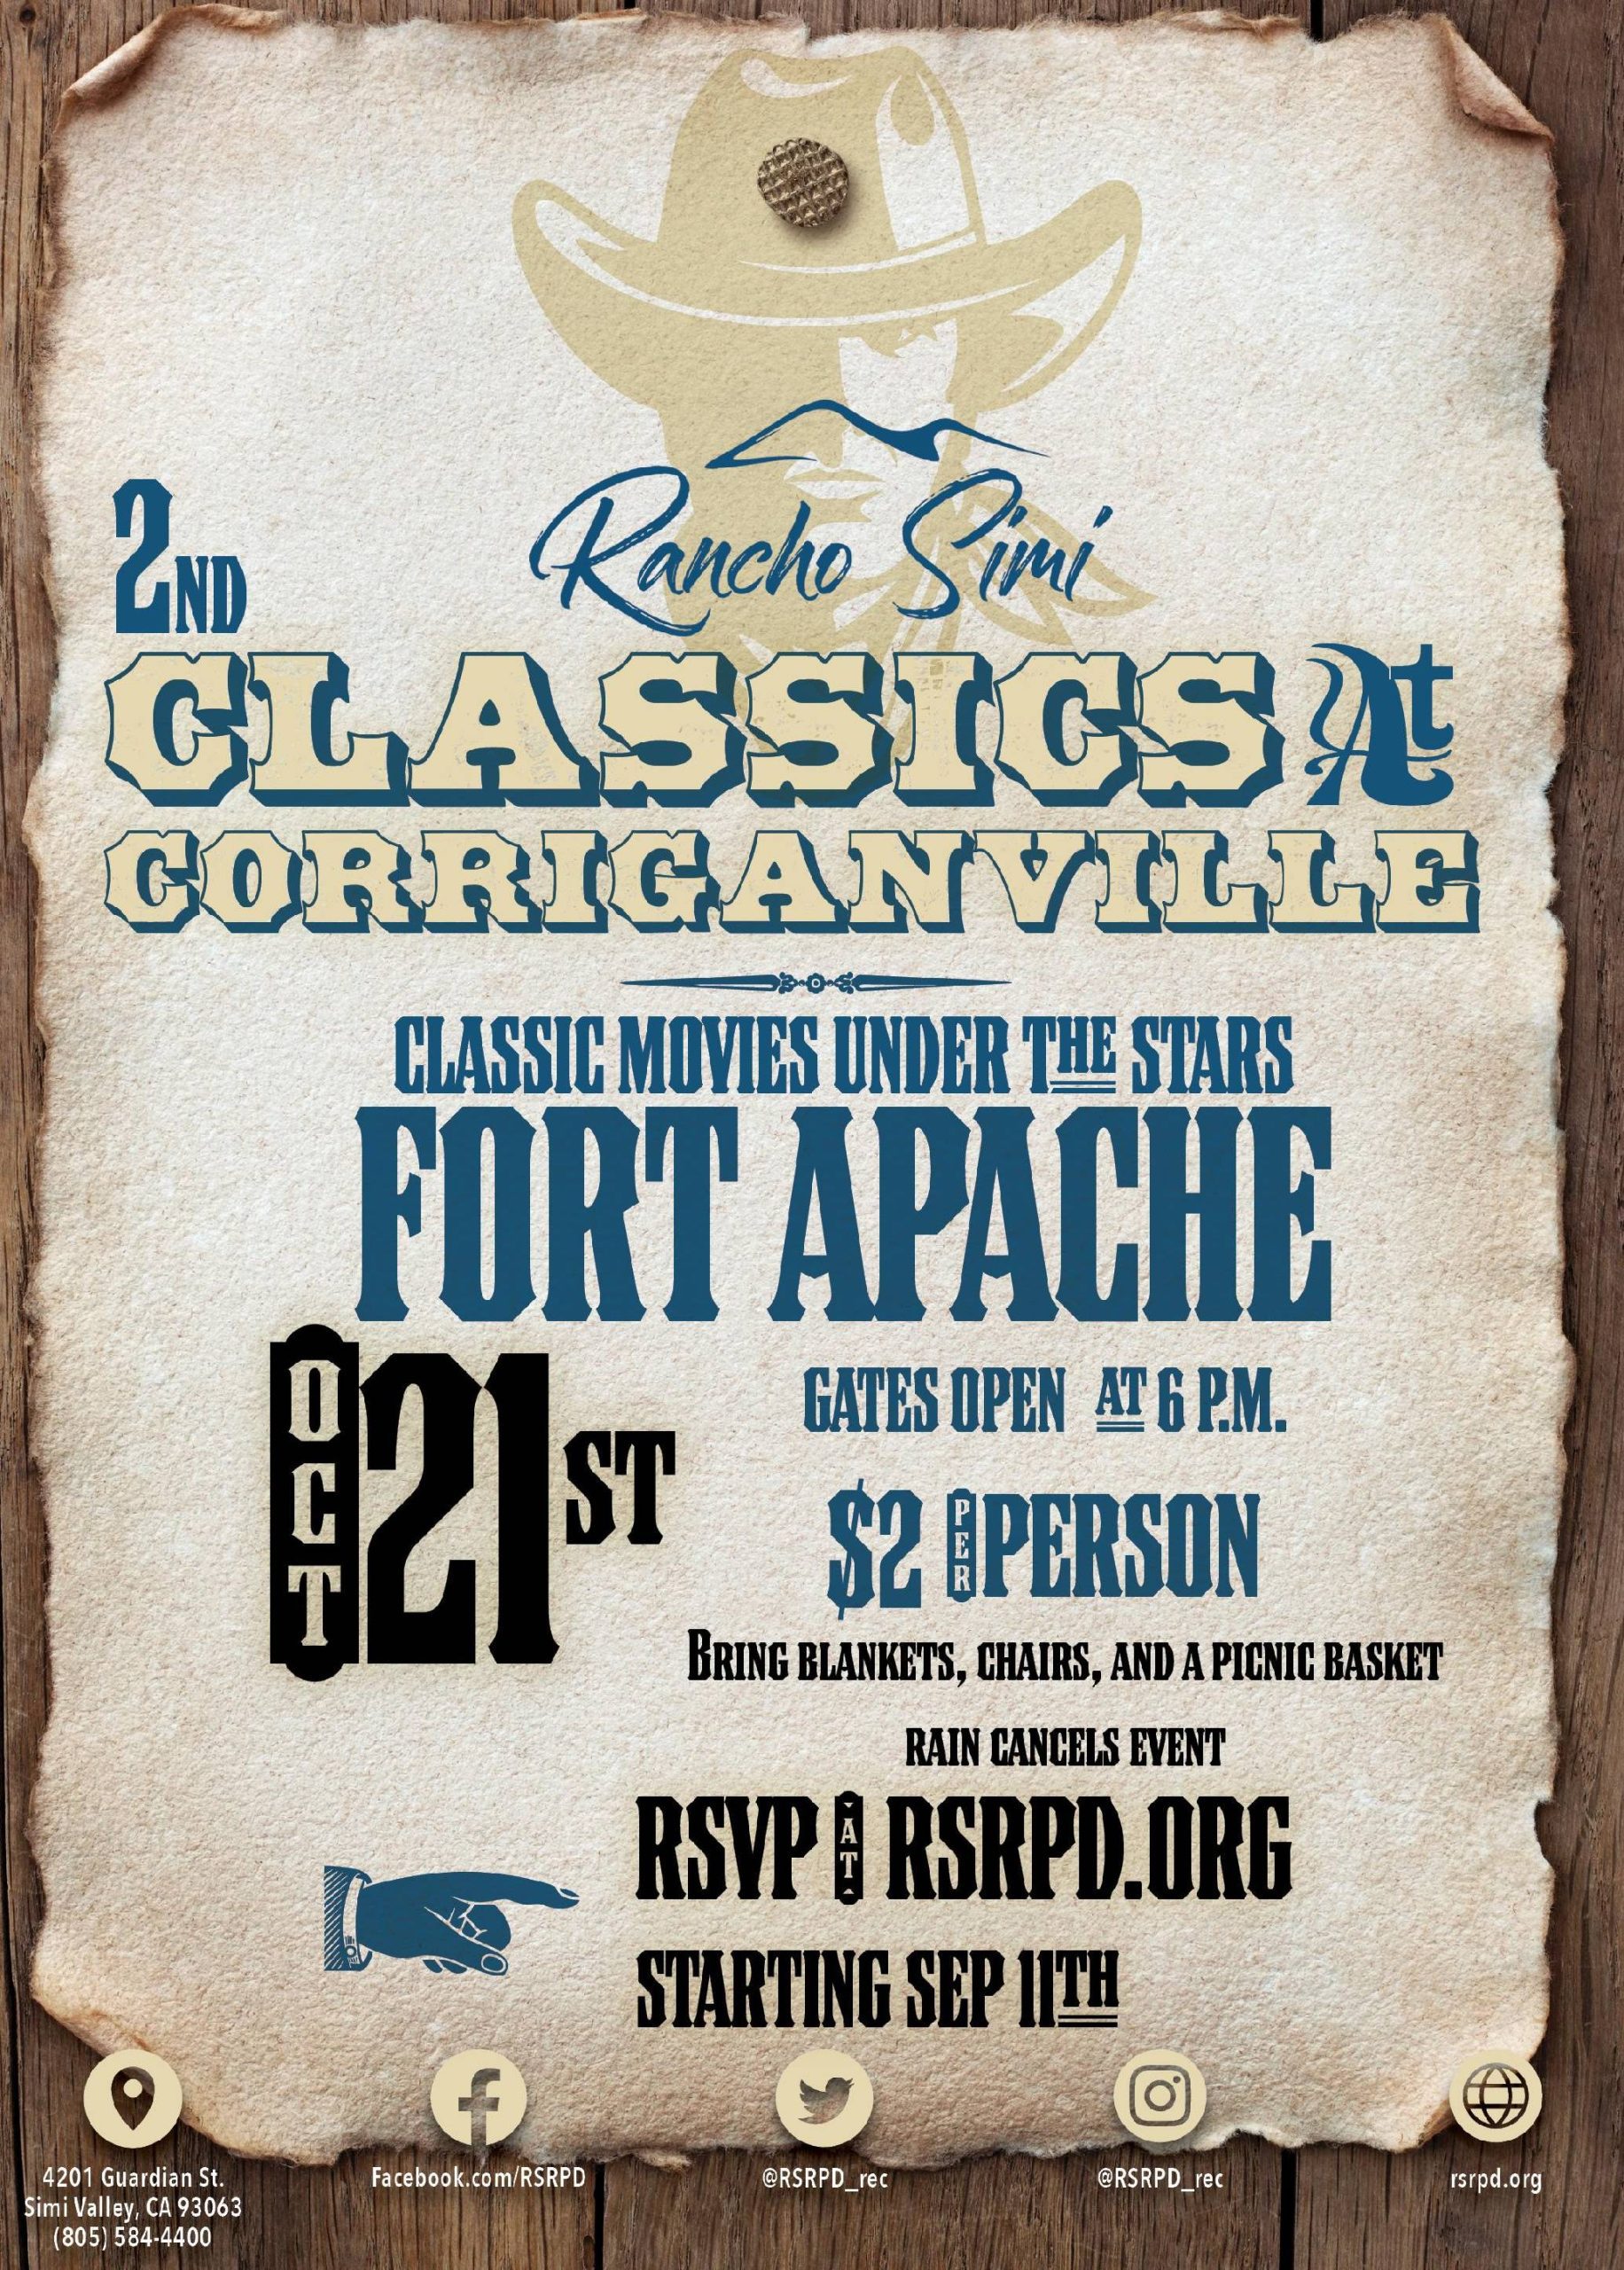 A flyer for a rodeo in fort apache.